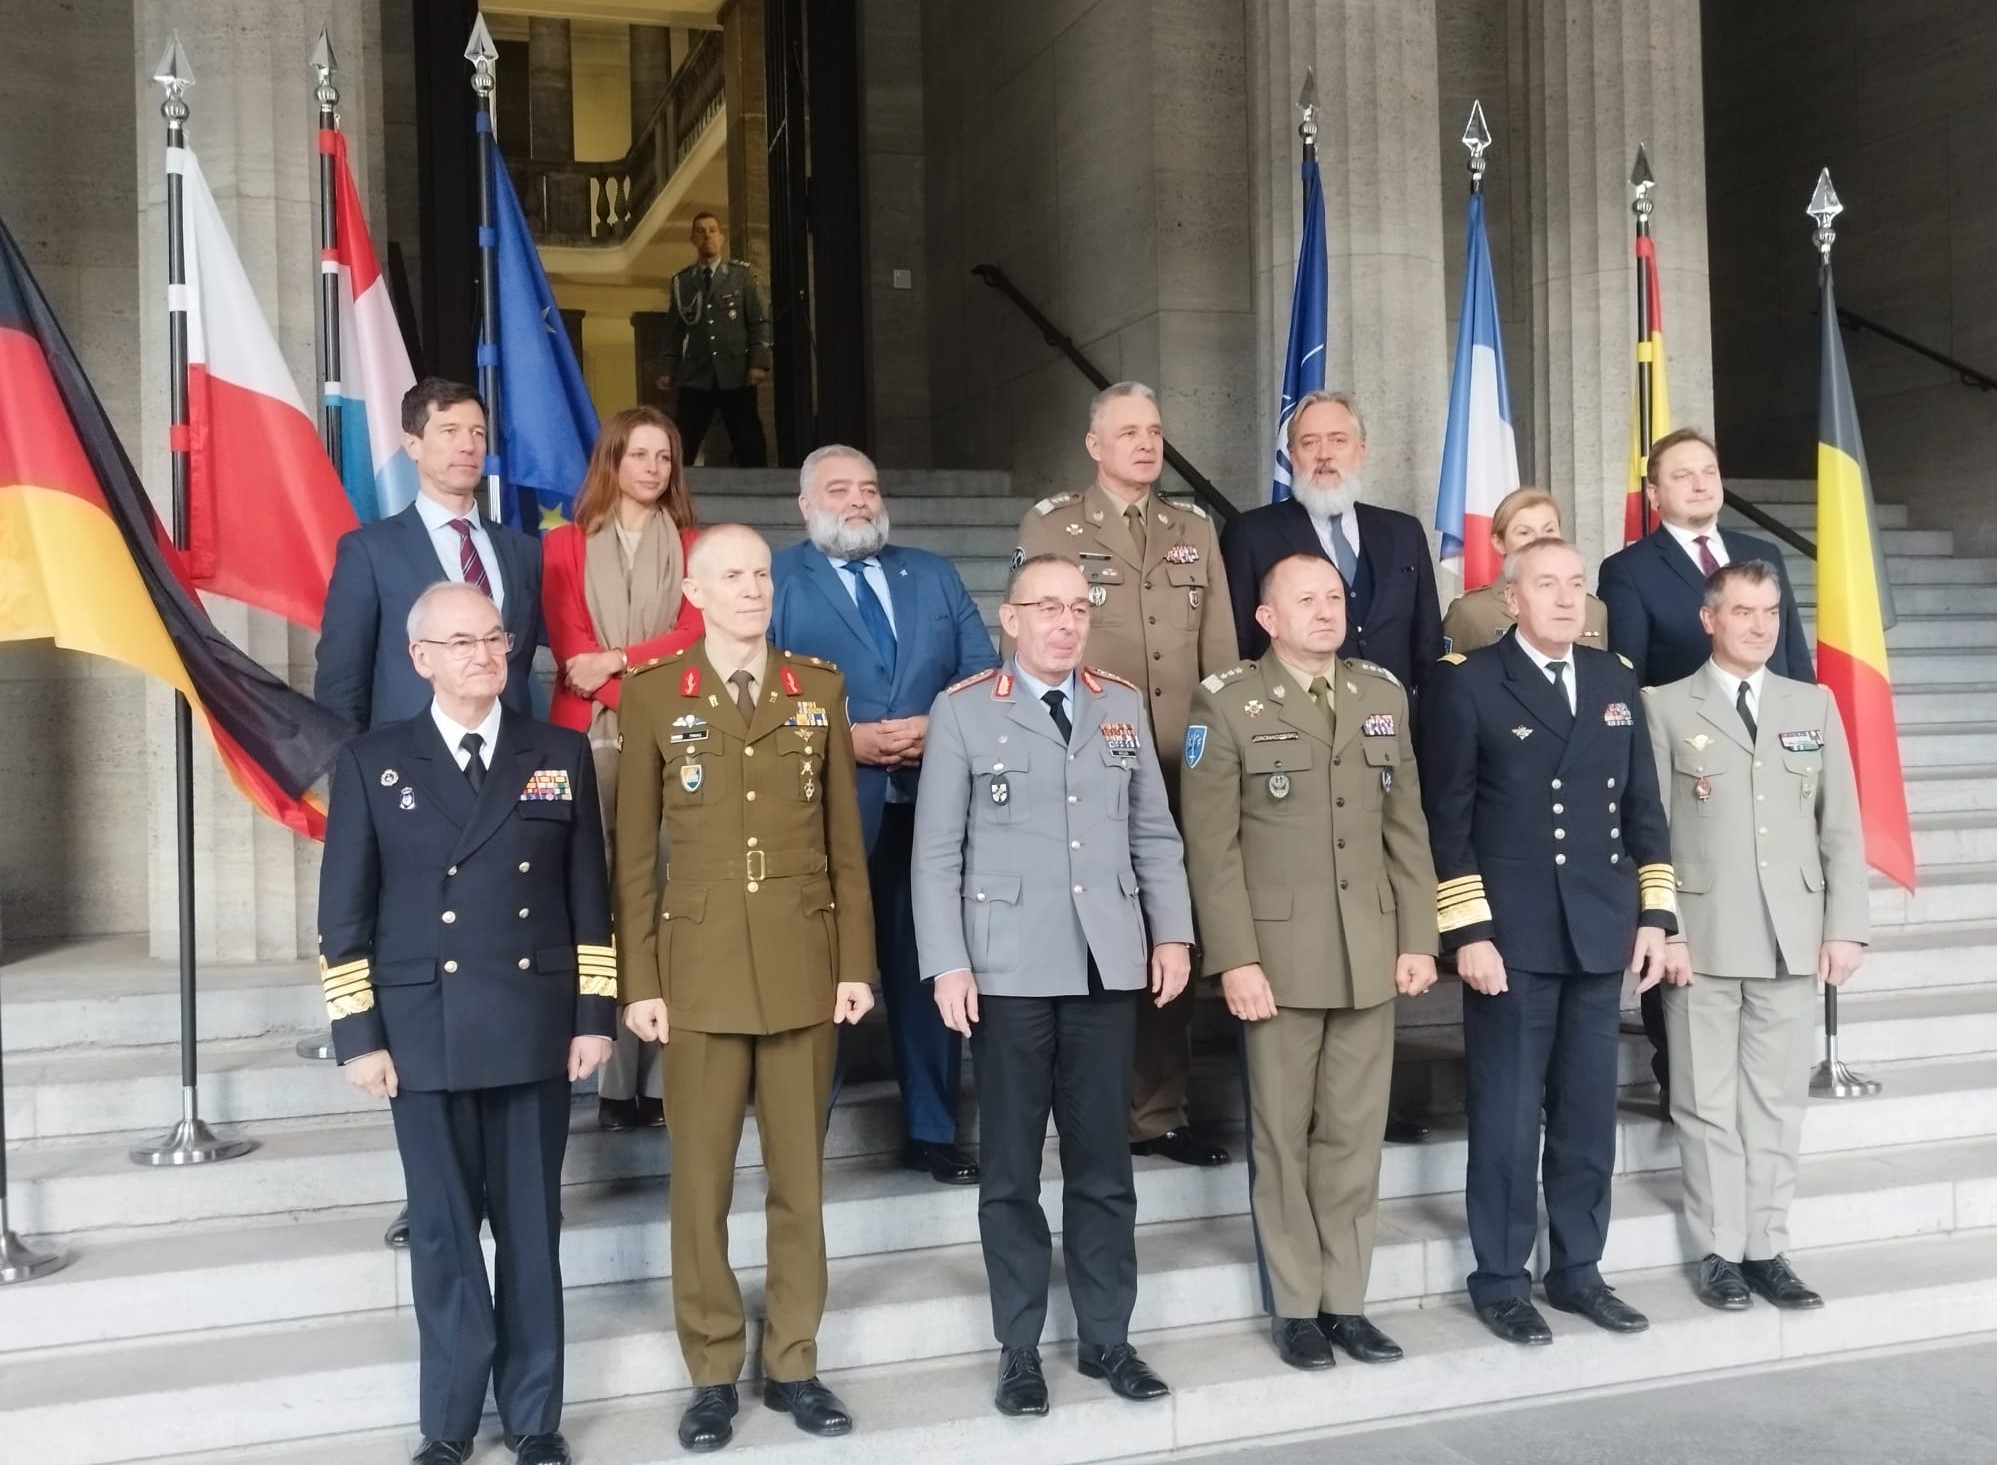 Attendees at the Eurocorps Committee meeting